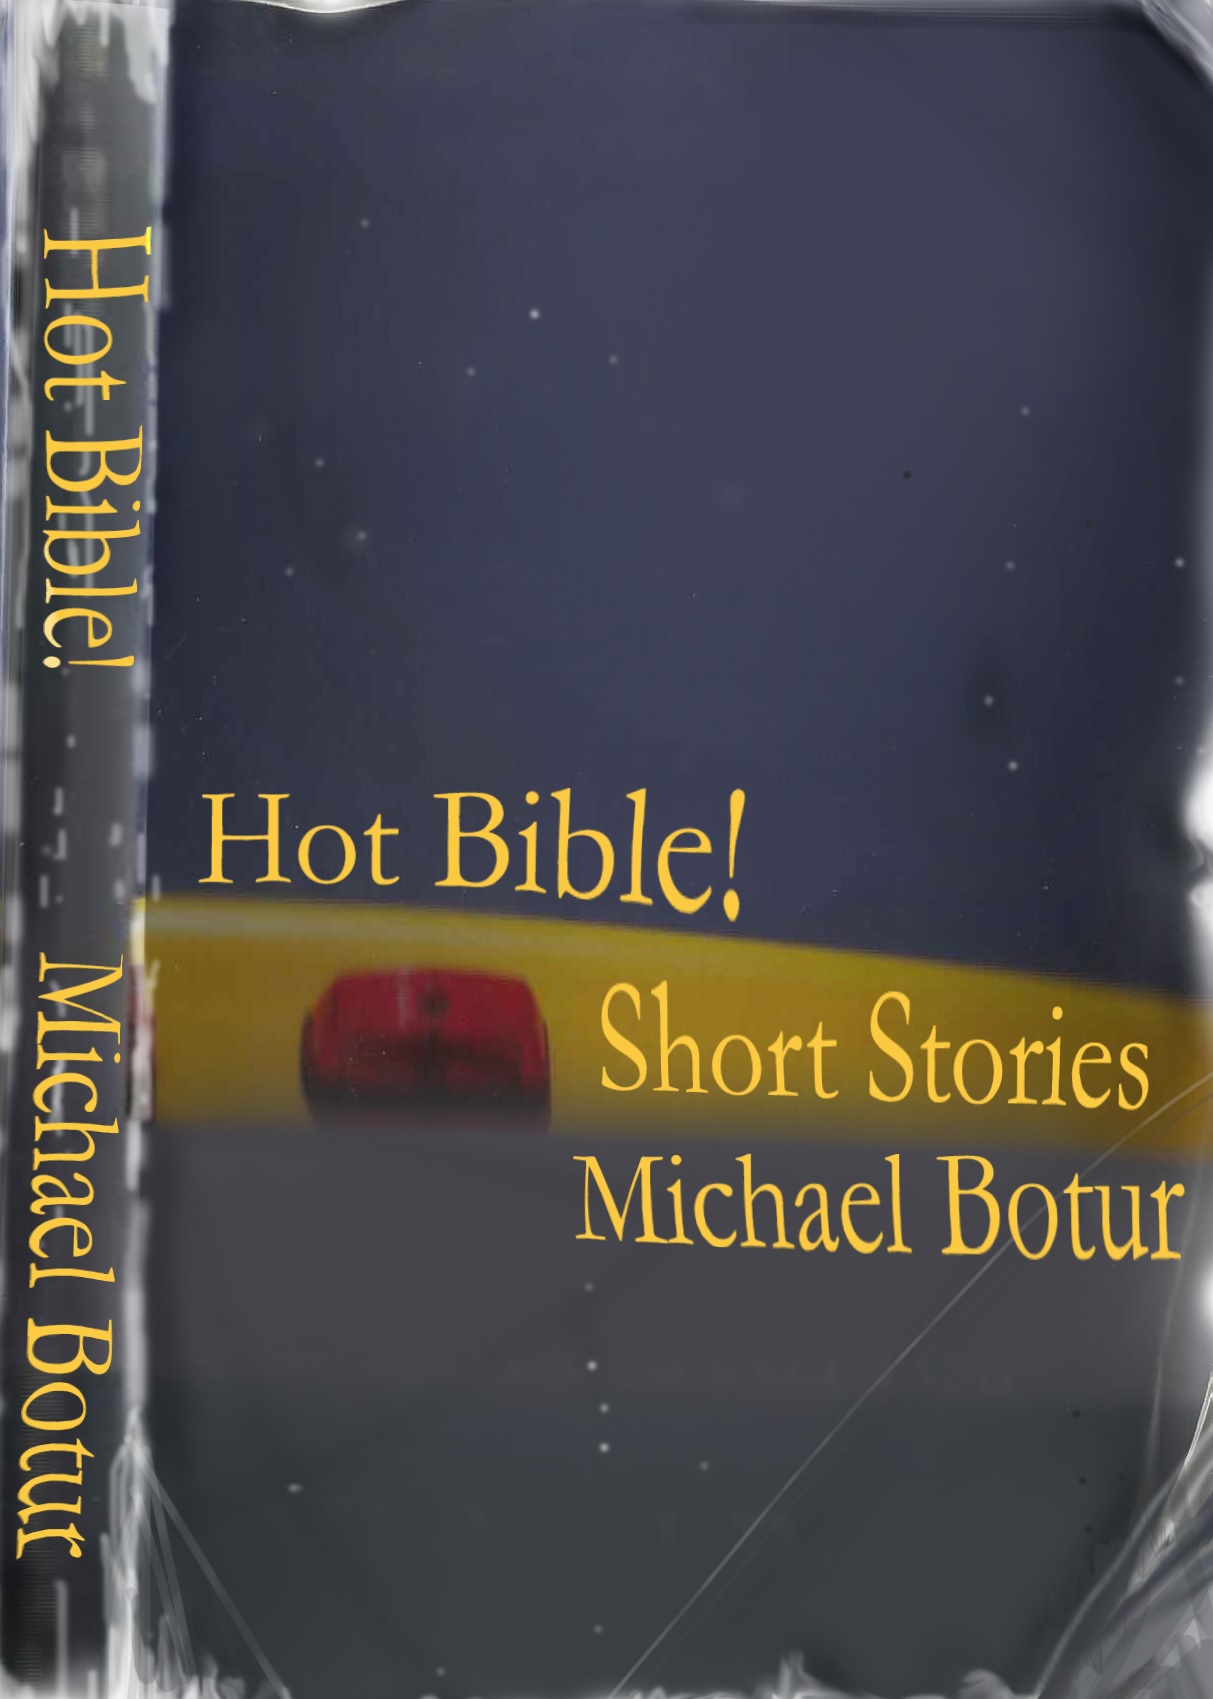 Single panel Hot Bible cover